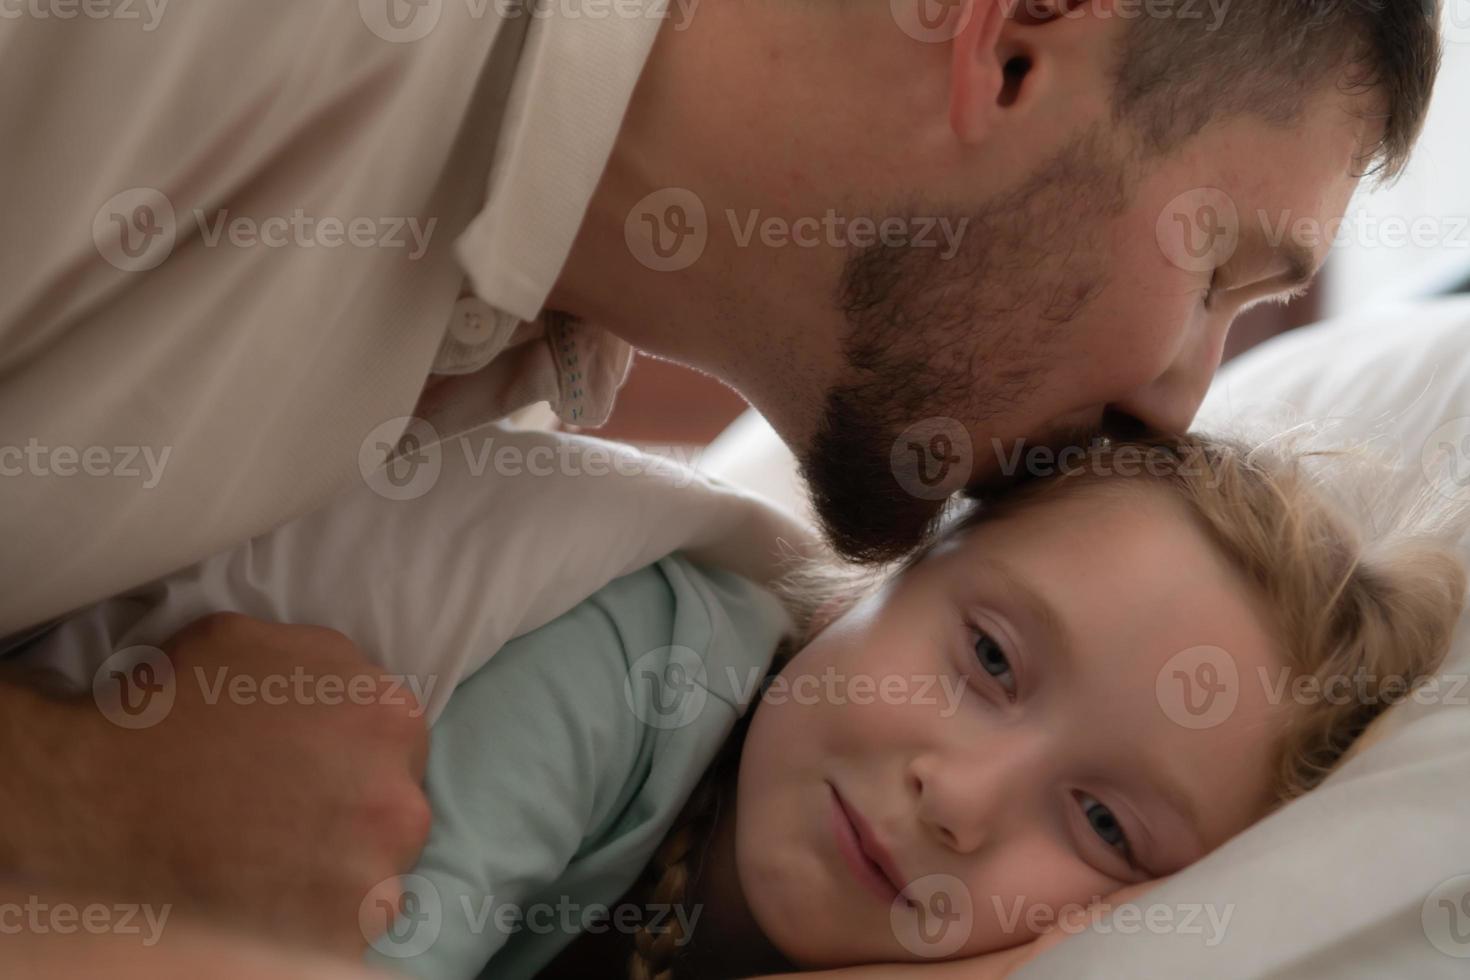 Before retiring to night, a father expresses his affection by kissing his daughter on the forehead. to get a good night's rest photo